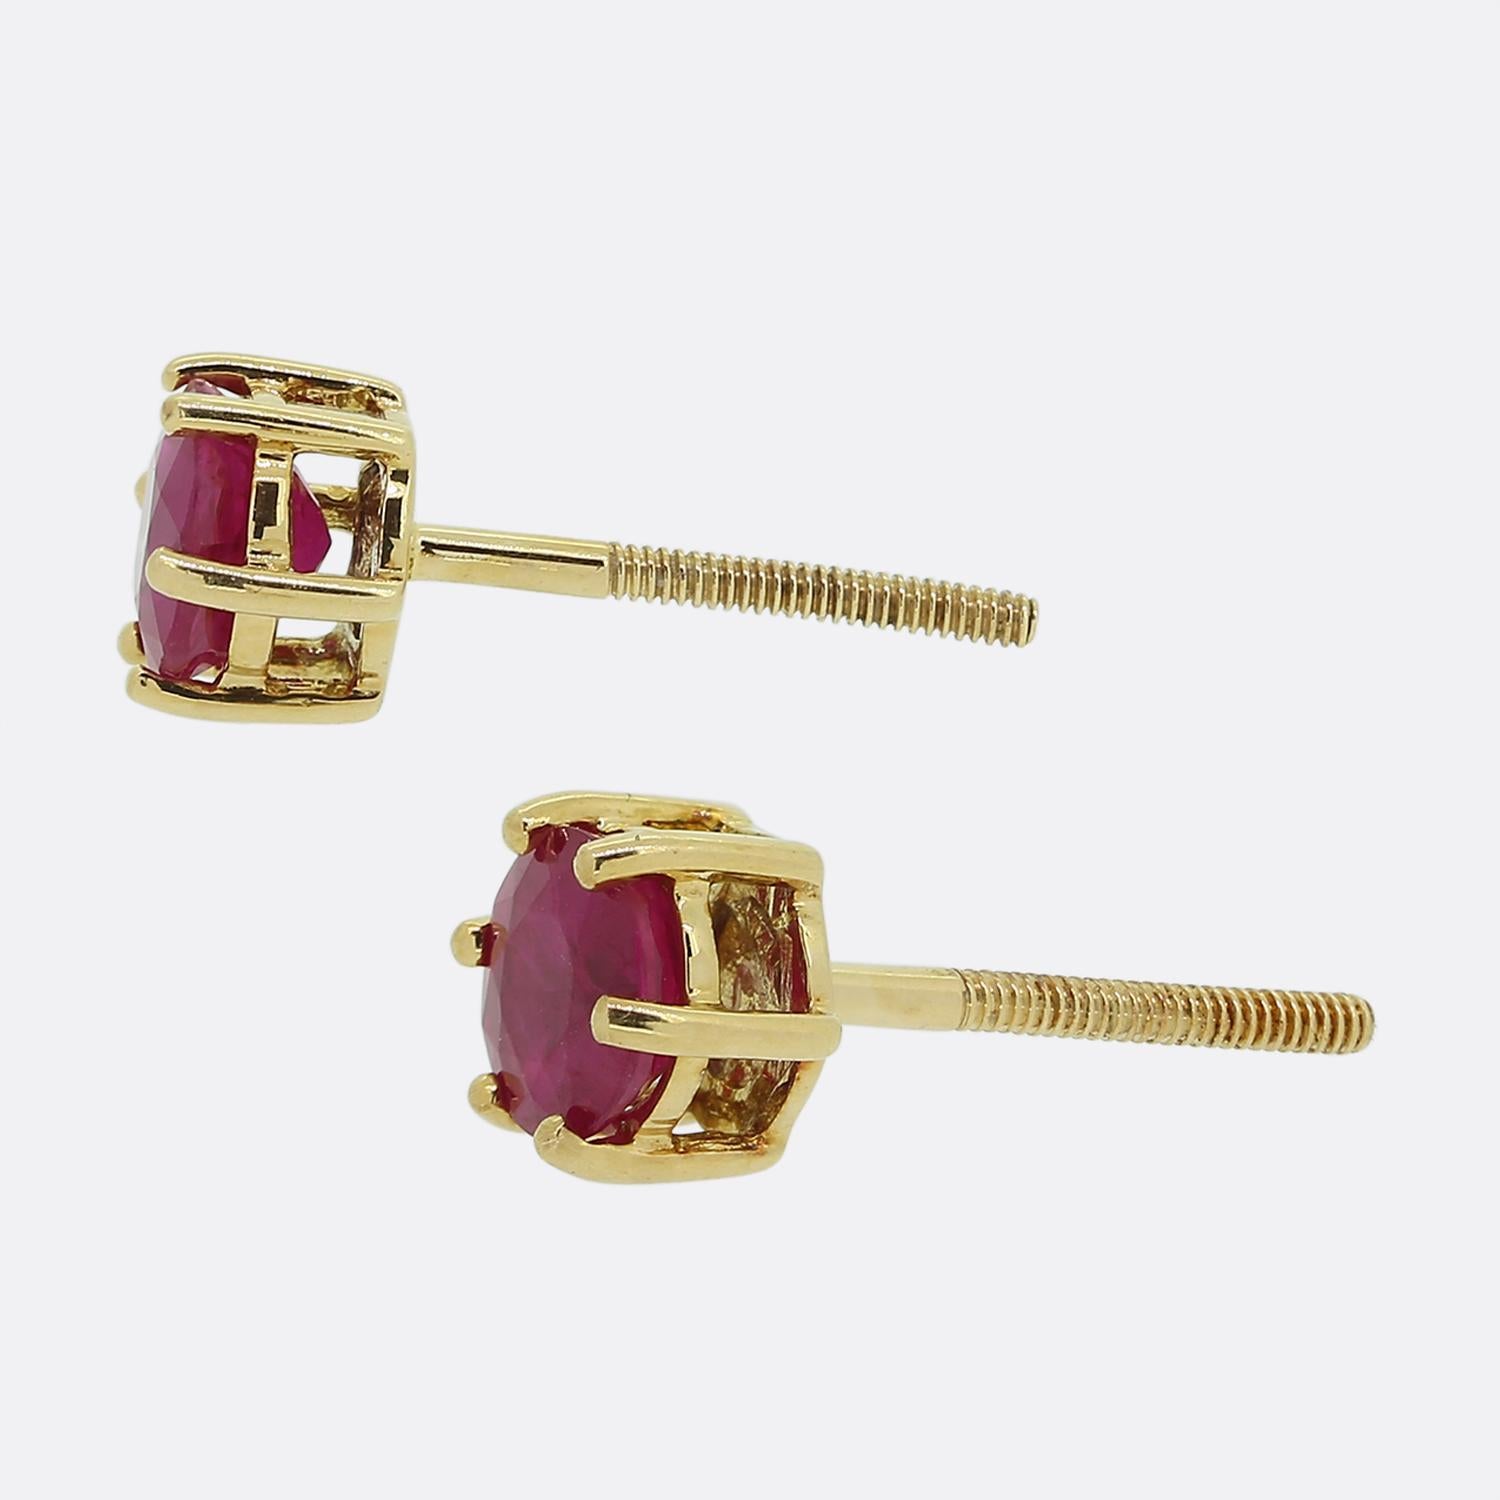 Here we have a charming pair of classically styled ruby stud earrings. Each piece showcases a single 0.50ct round faceted ruby in a 6 clawed setting. Both stones are perfectly matched and possess a vivid red colour with slight pinky undertone.